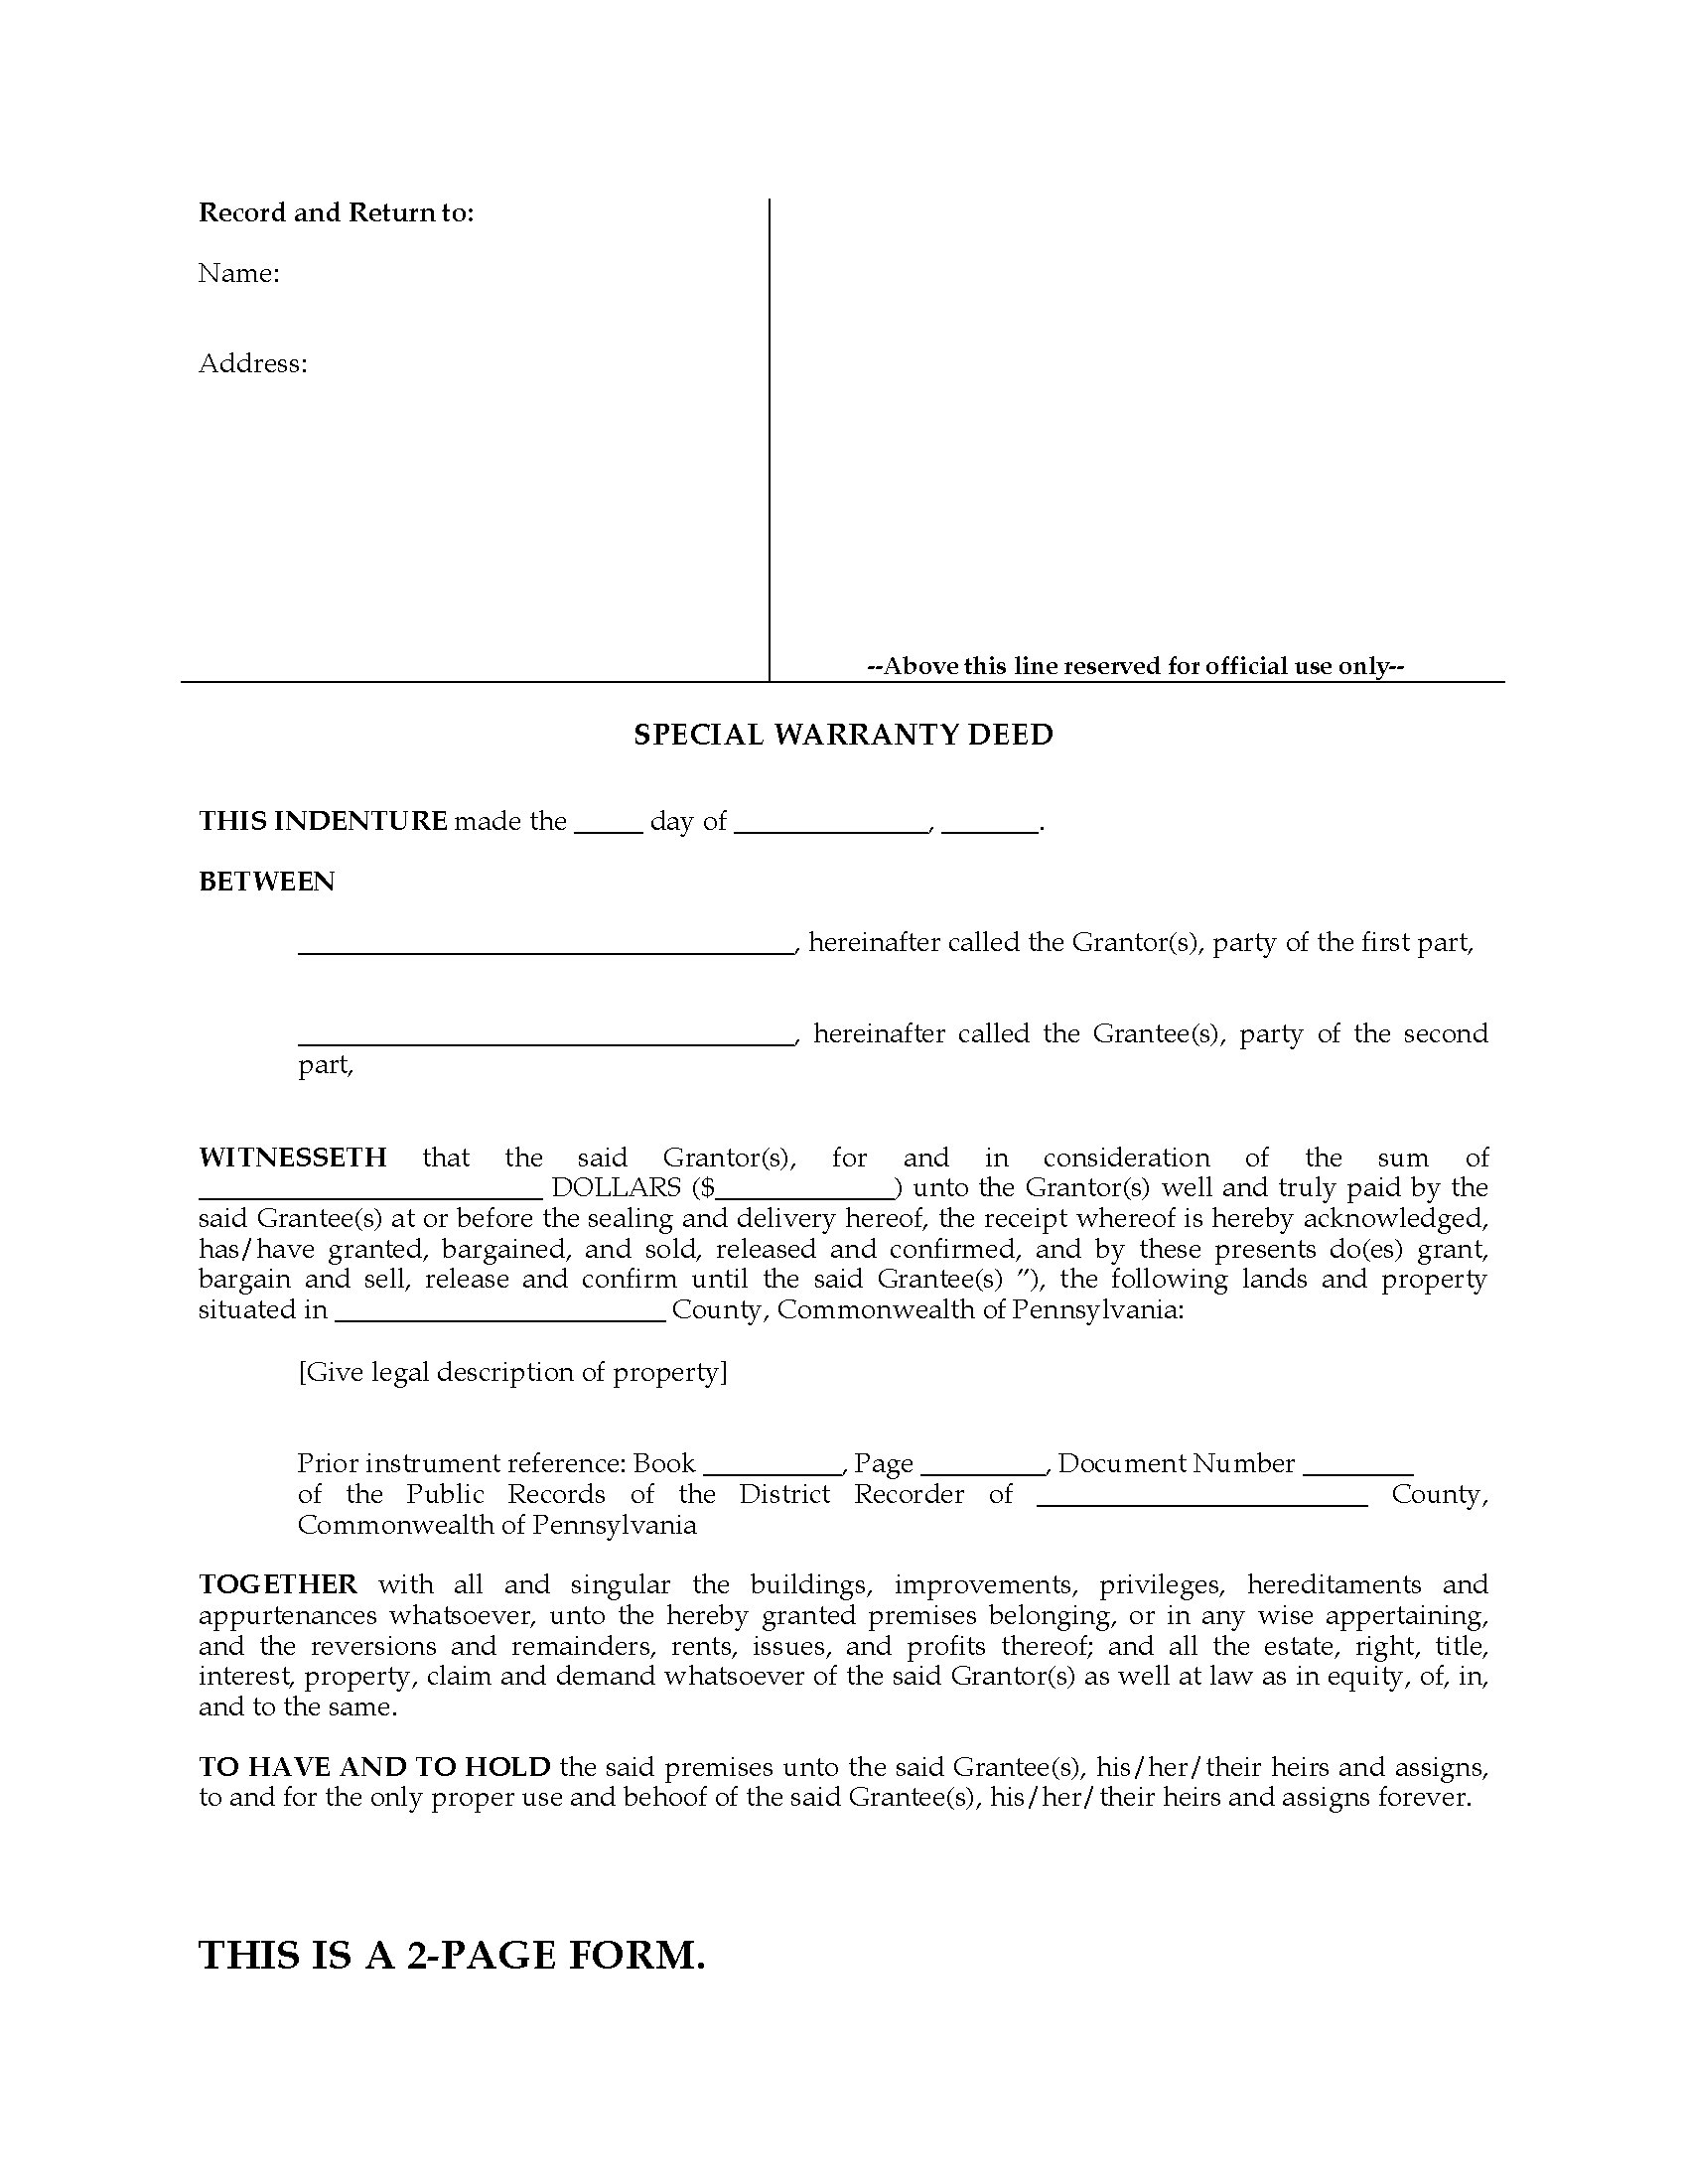 pennsylvania-special-warranty-deed-legal-forms-and-business-templates